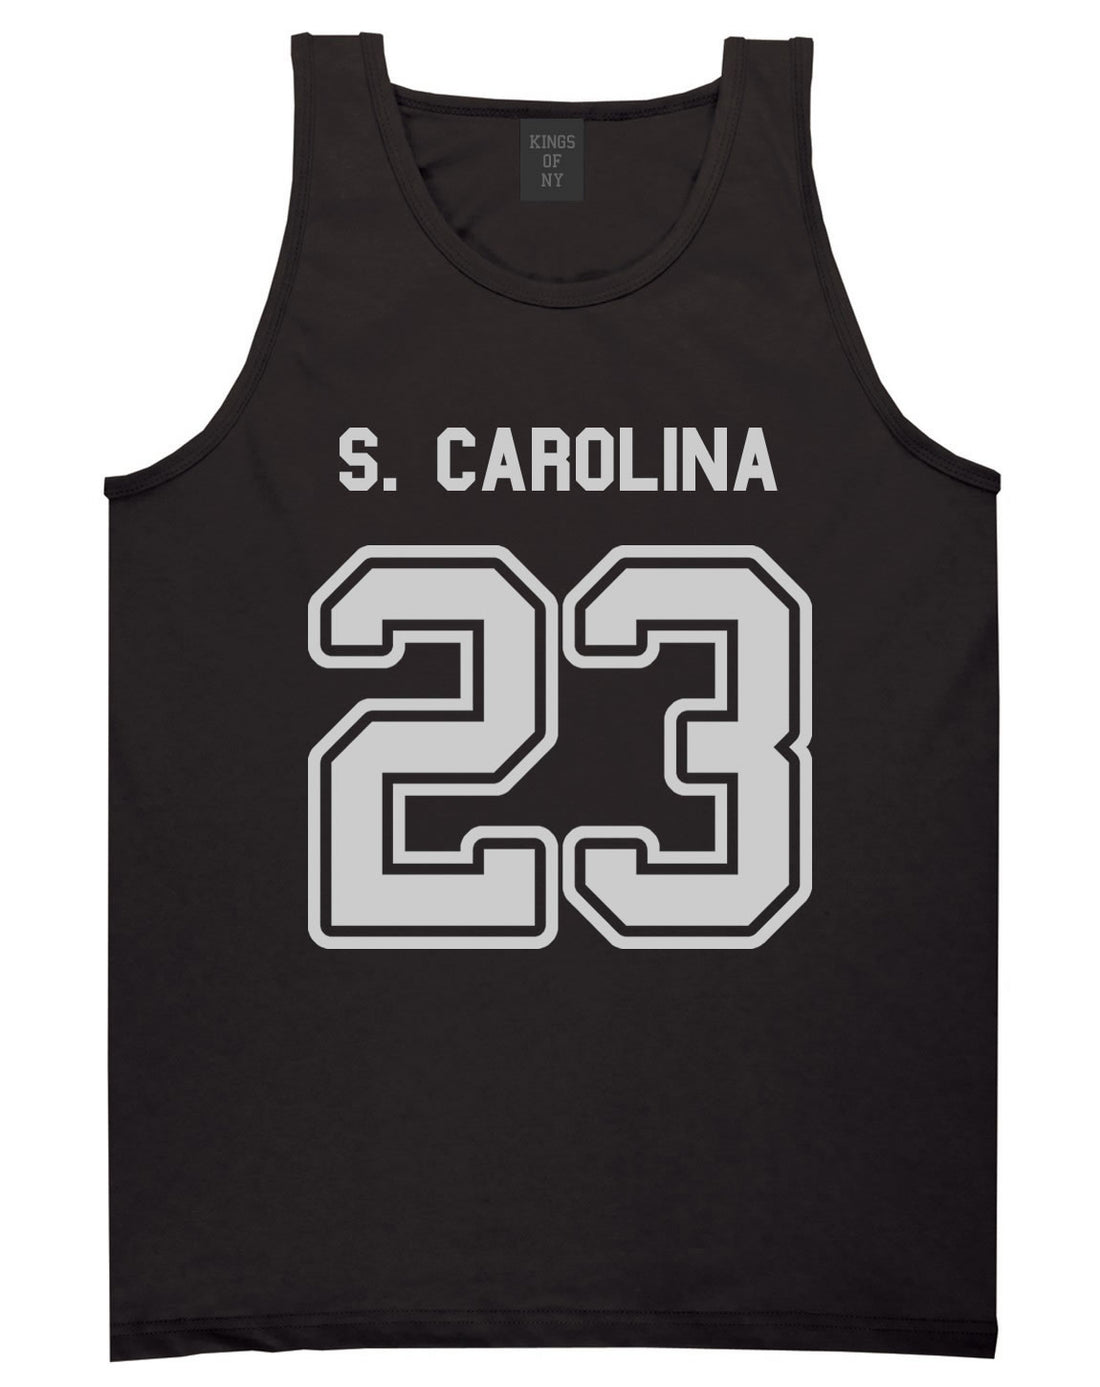 Sport Style South Carolina 23 Team State Jersey Mens Tank Top By Kings Of NY